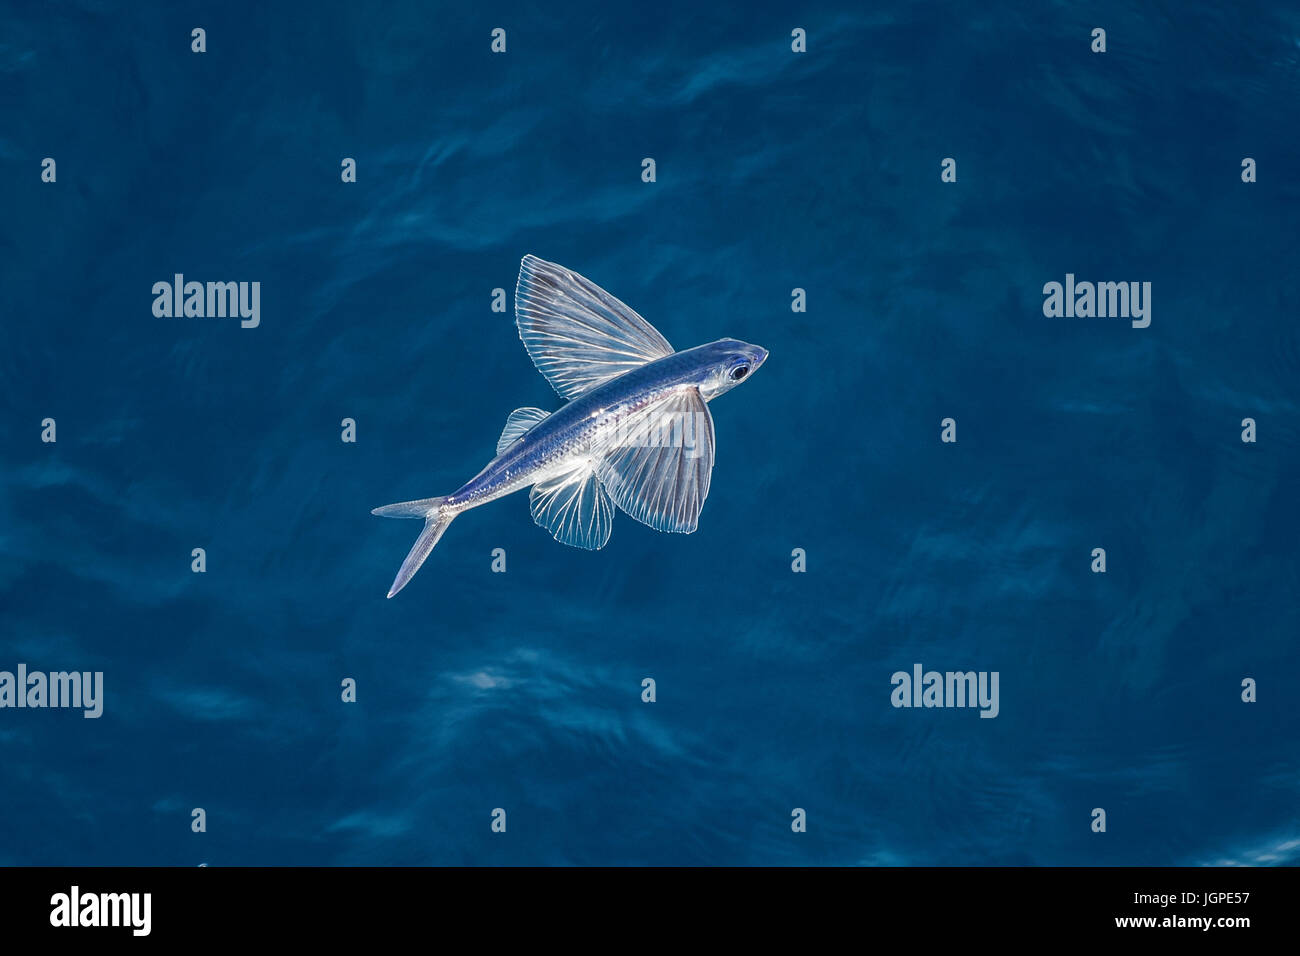 Flying fish species in mid-air, several hundred miles off Mauritania, North Africa, North Atlantic Ocean Stock Photo